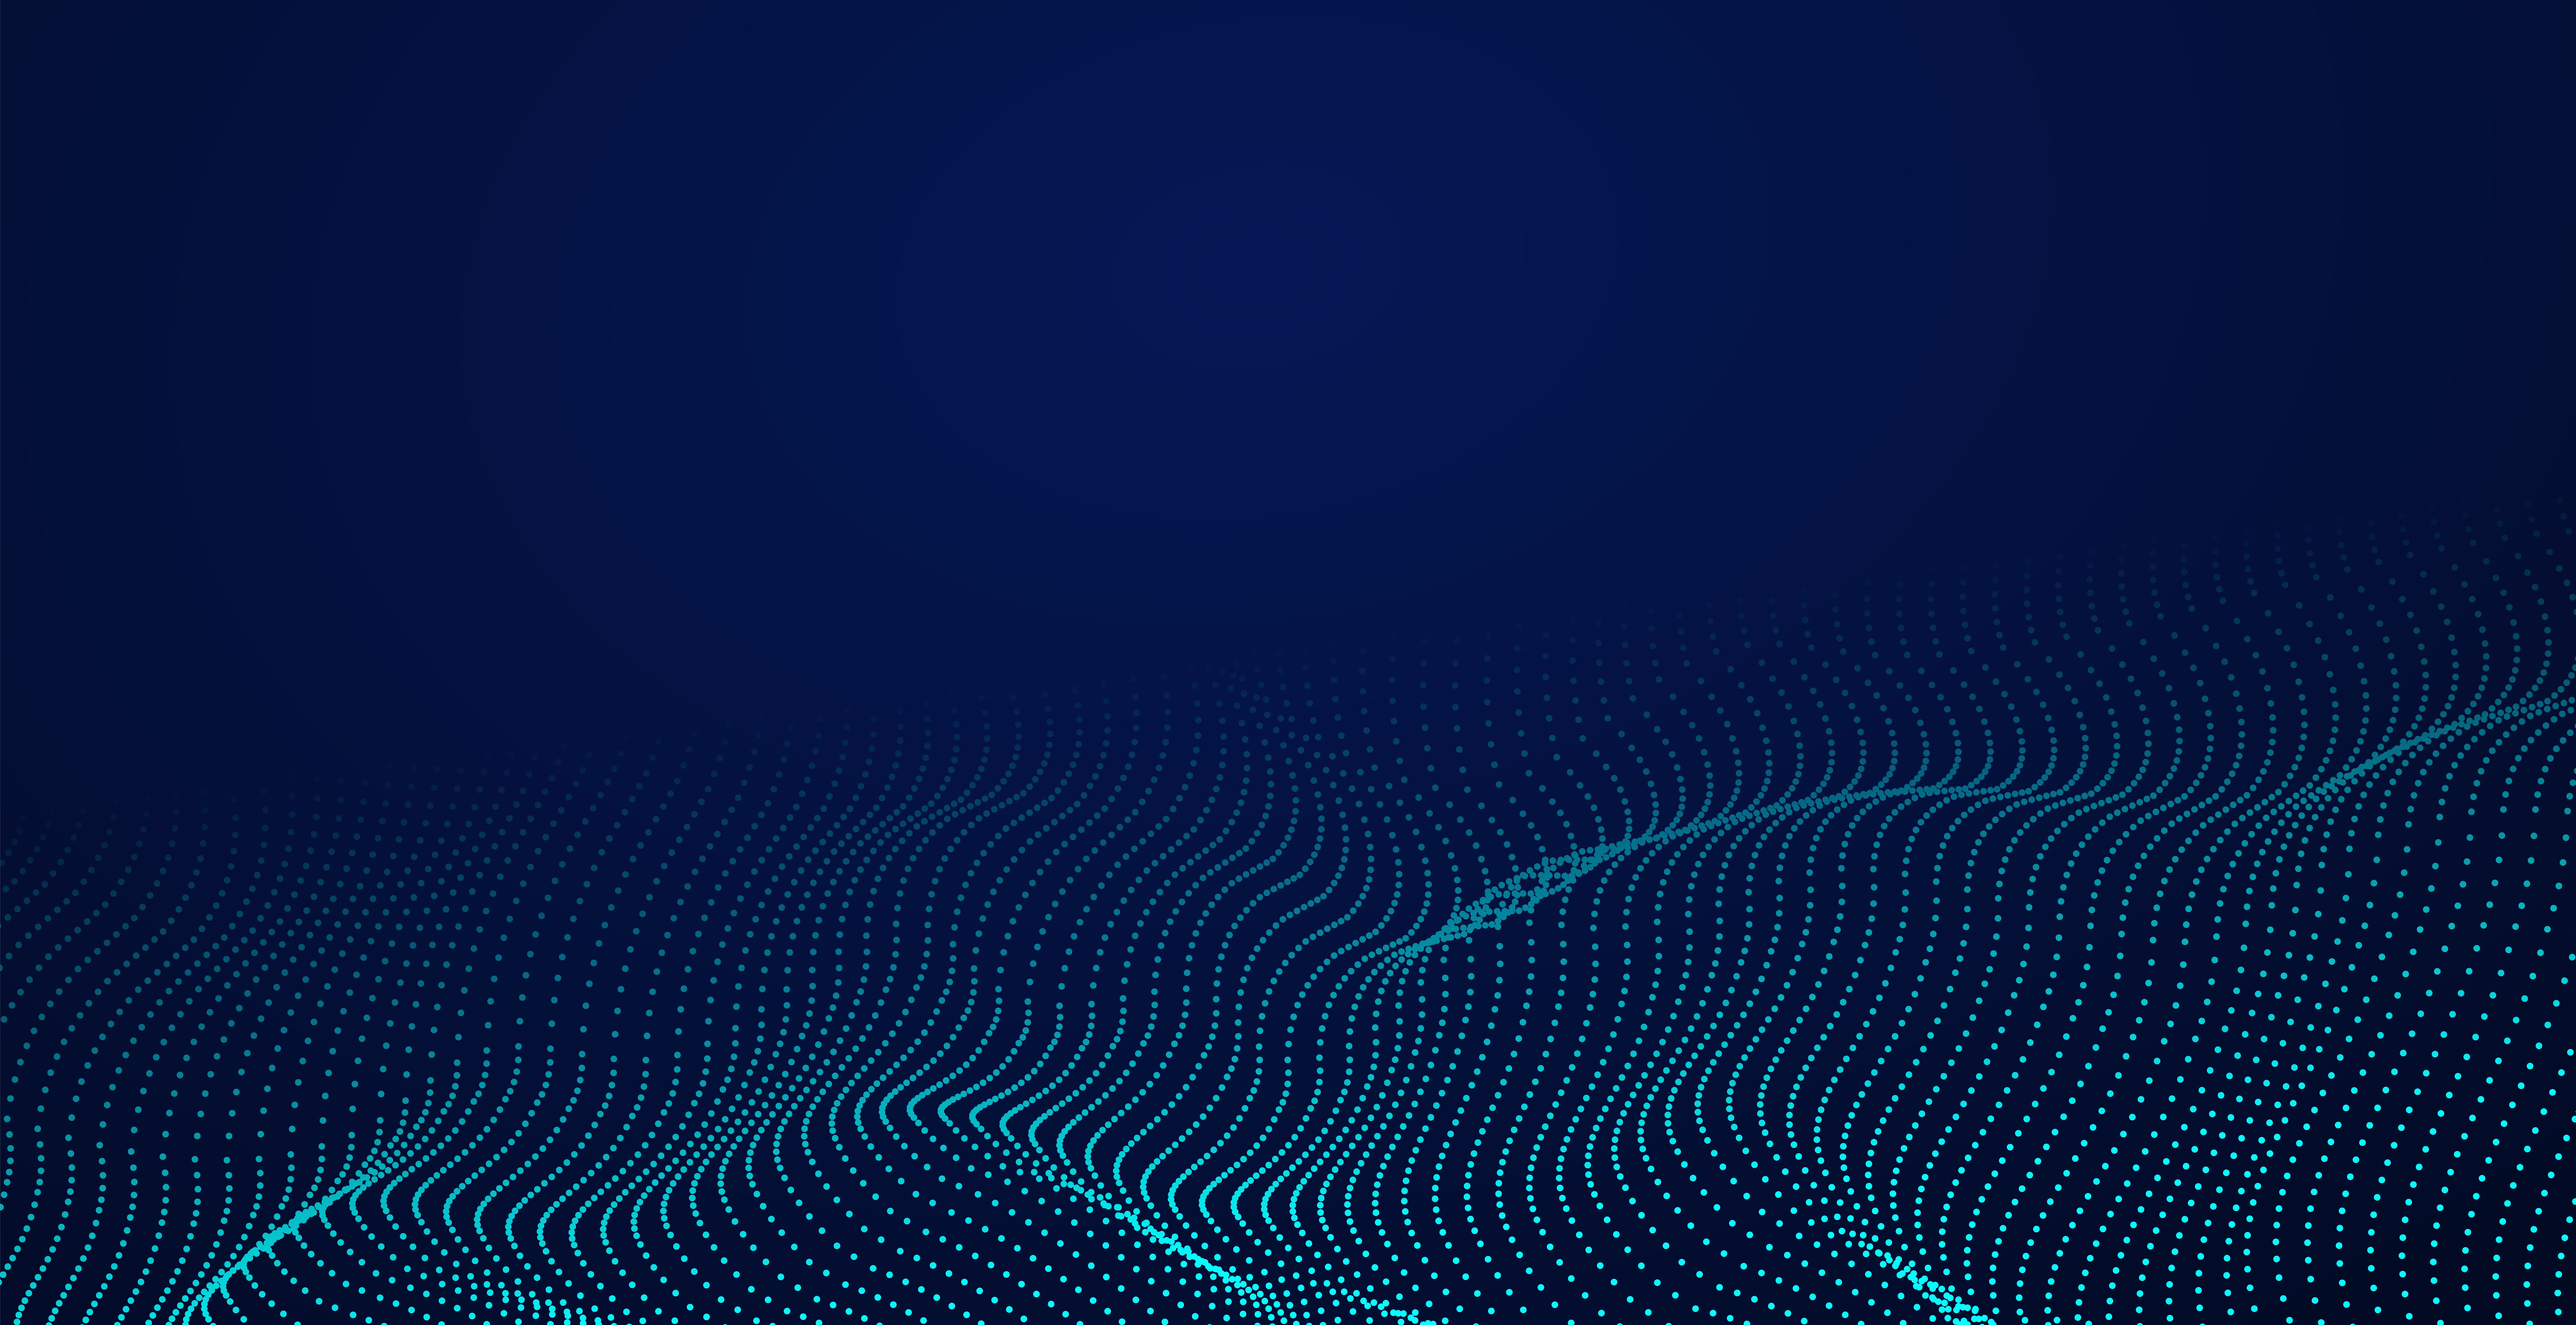 3D wave field of teal particles against a blue background.